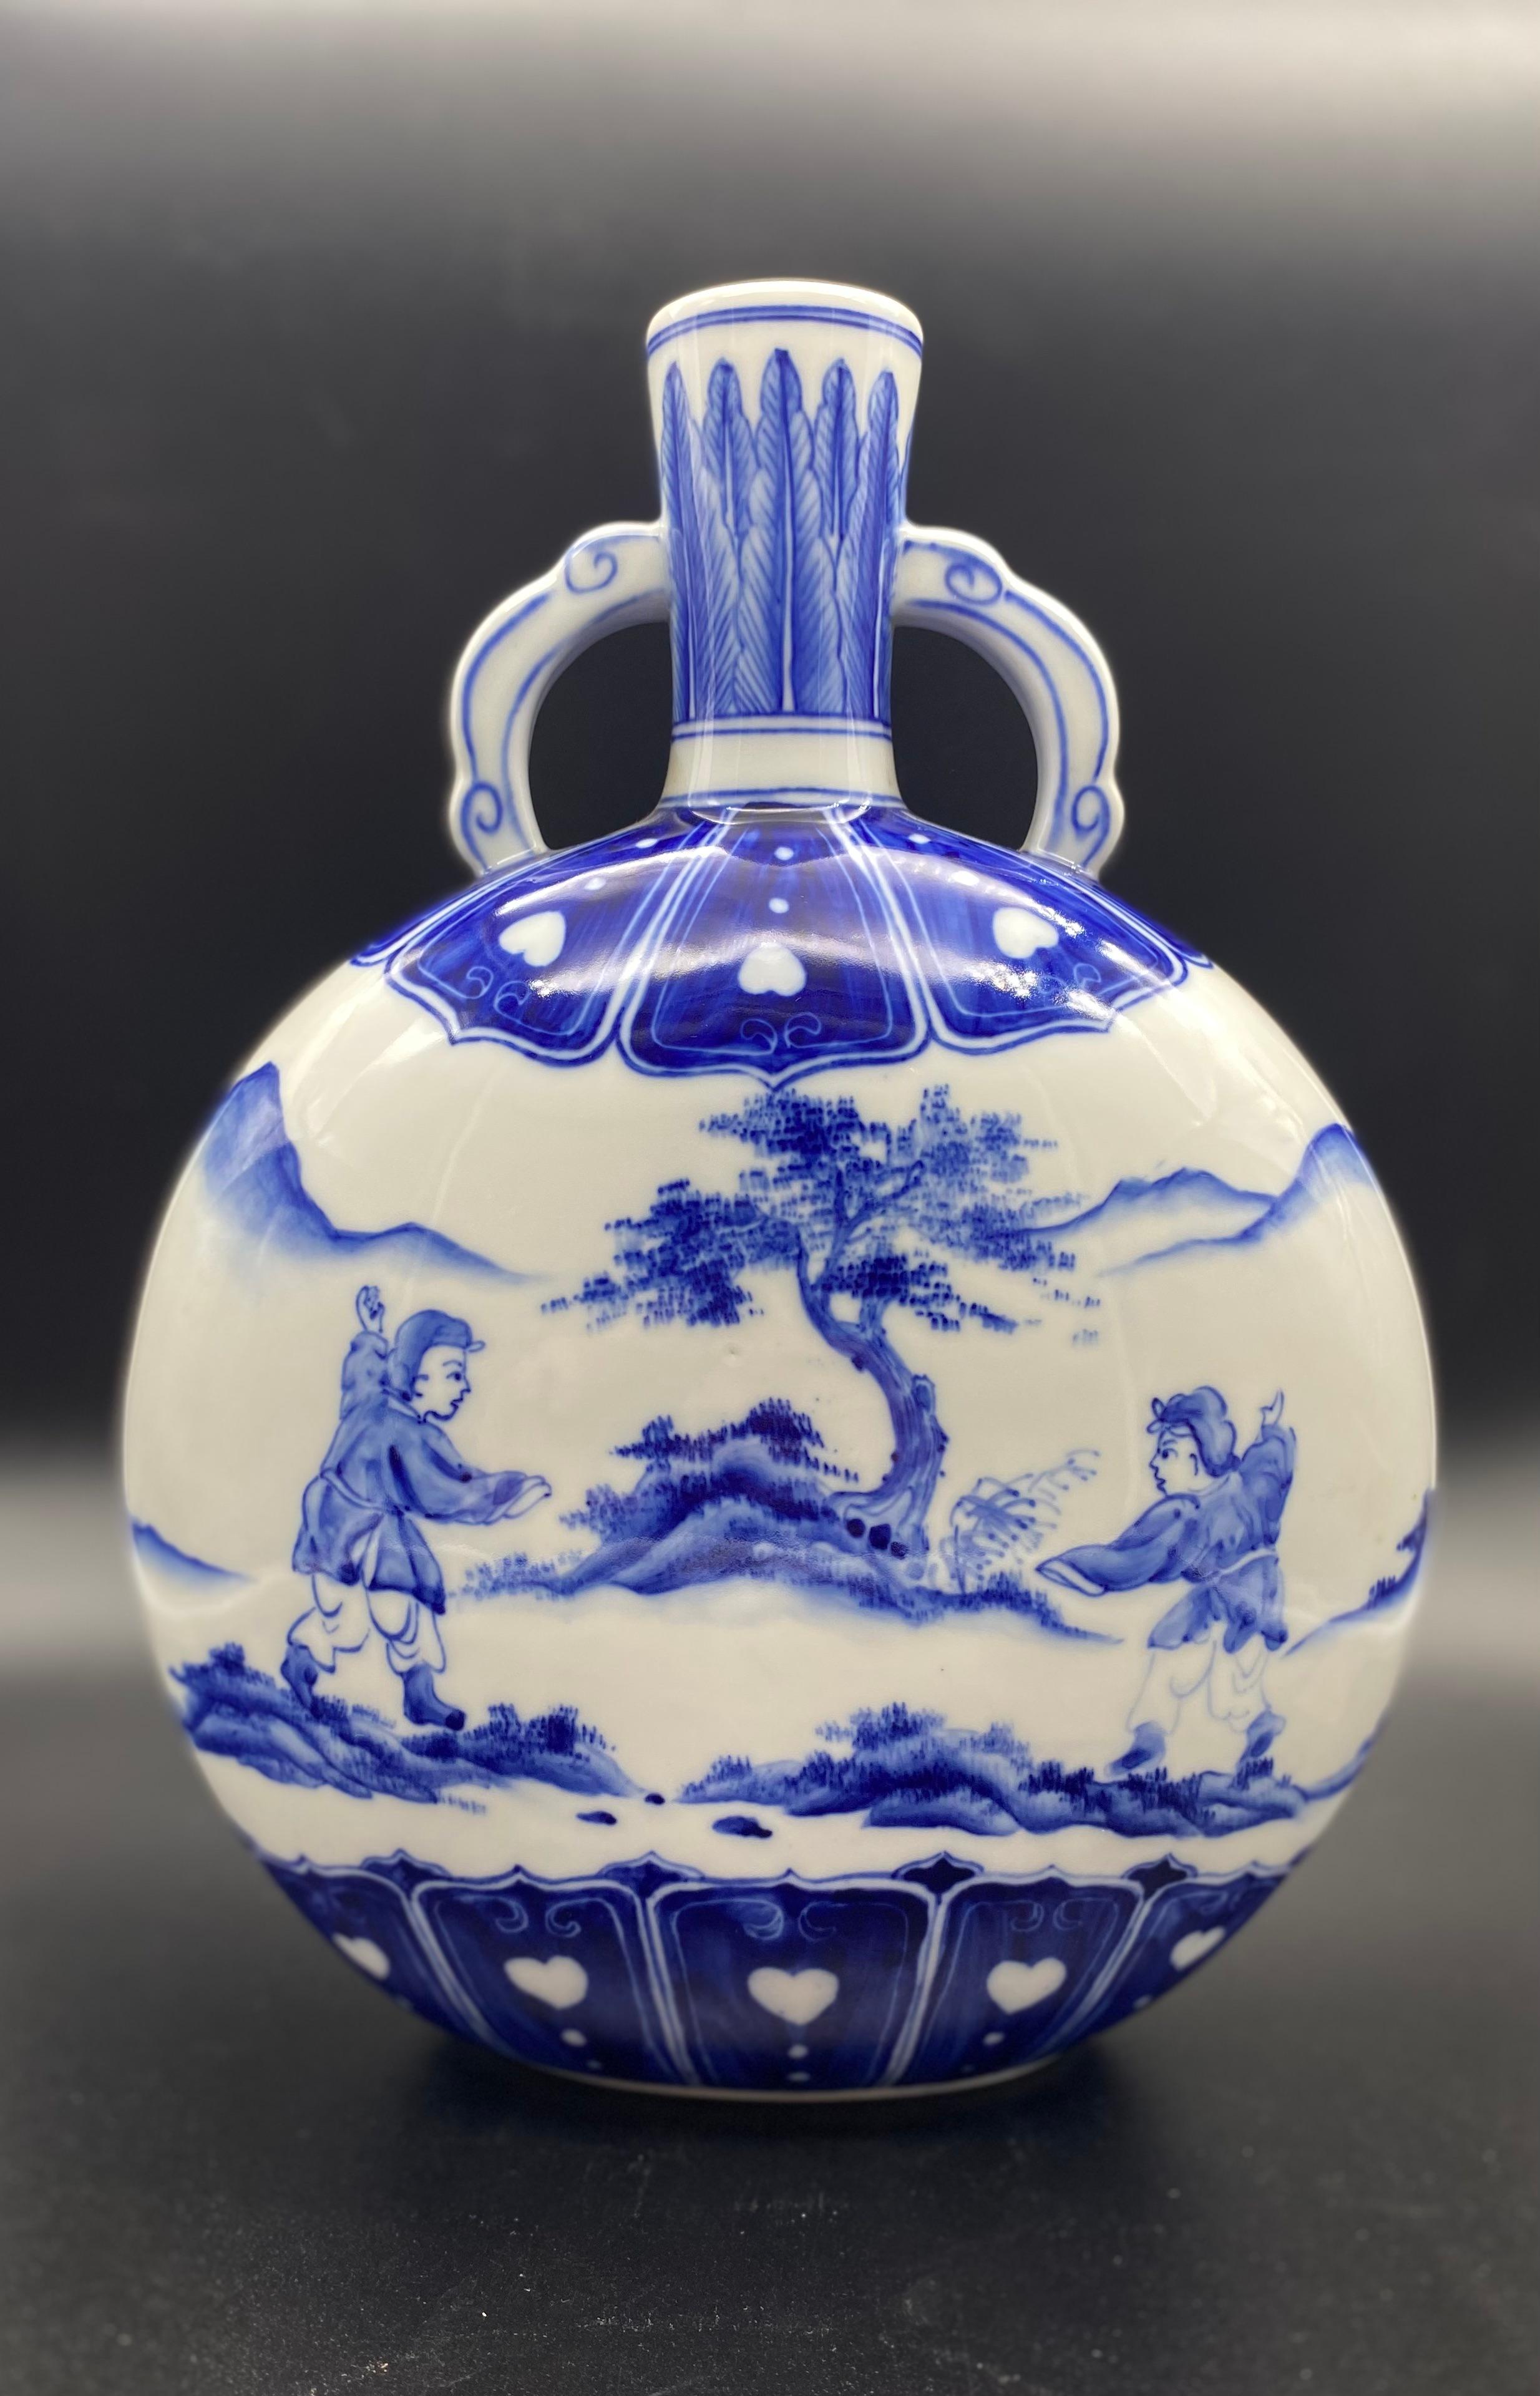 Beautiful Chinese gourd vase in white and blue porcelain.
Good quality porcelain for this pretty decorative object.
Two decorations on either side of the vase.
The decorations represent two characters in a mountainous landscape with a tree in the